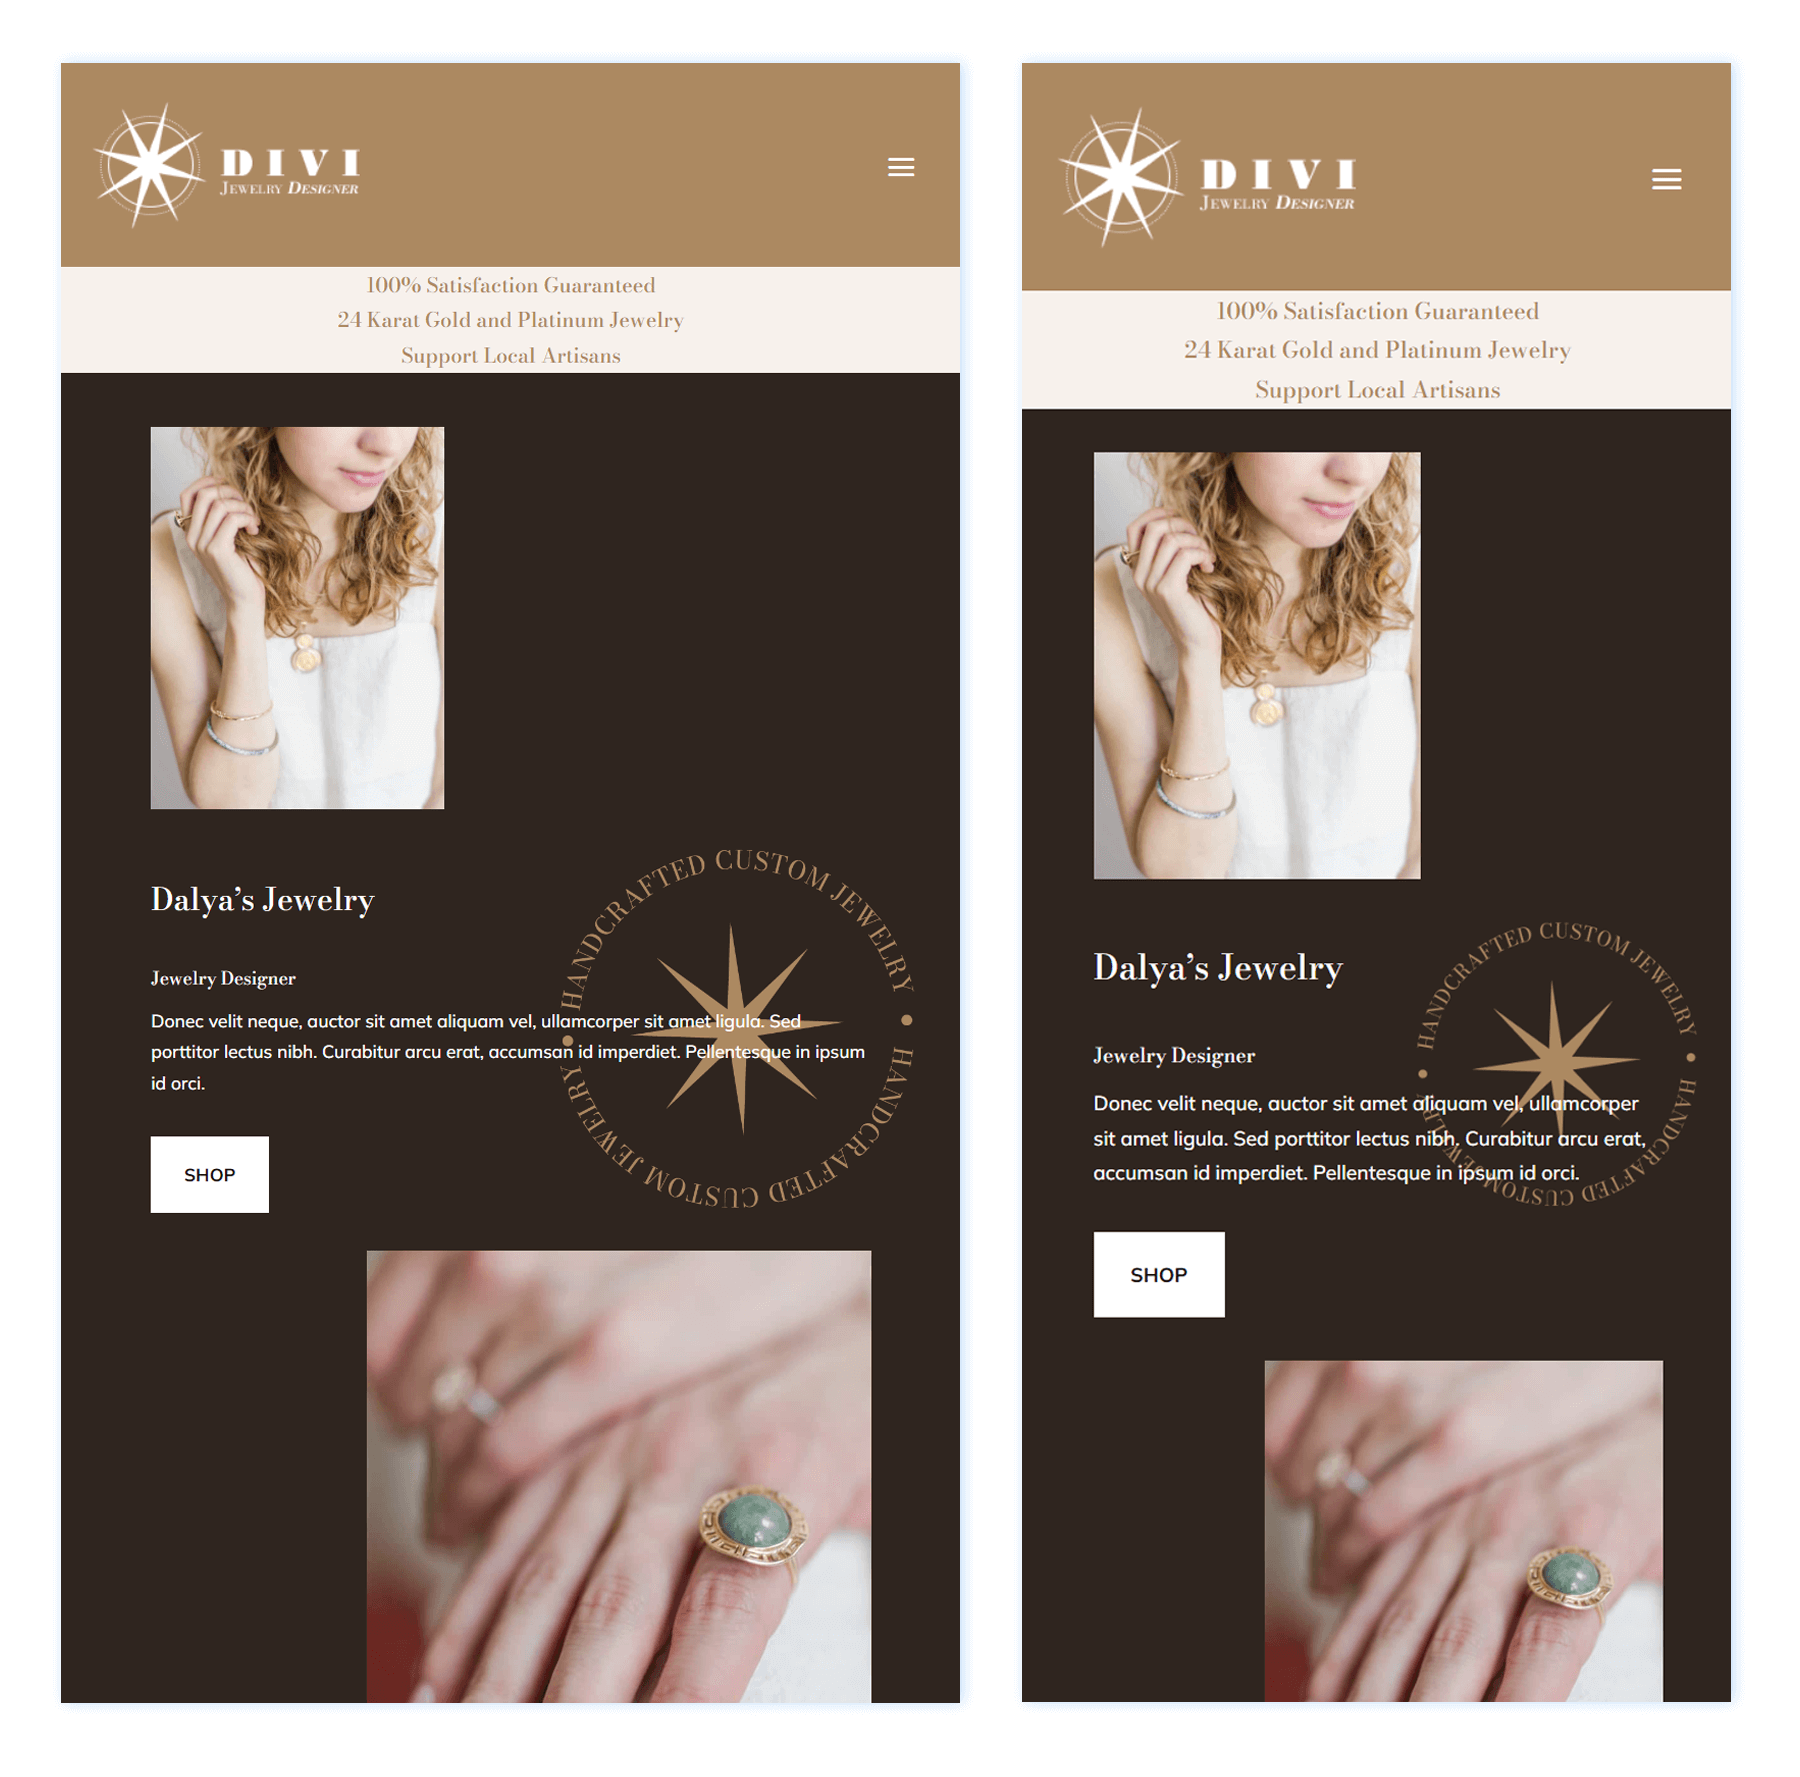 Divi Jewelry Header Design for Tablet and Mobile